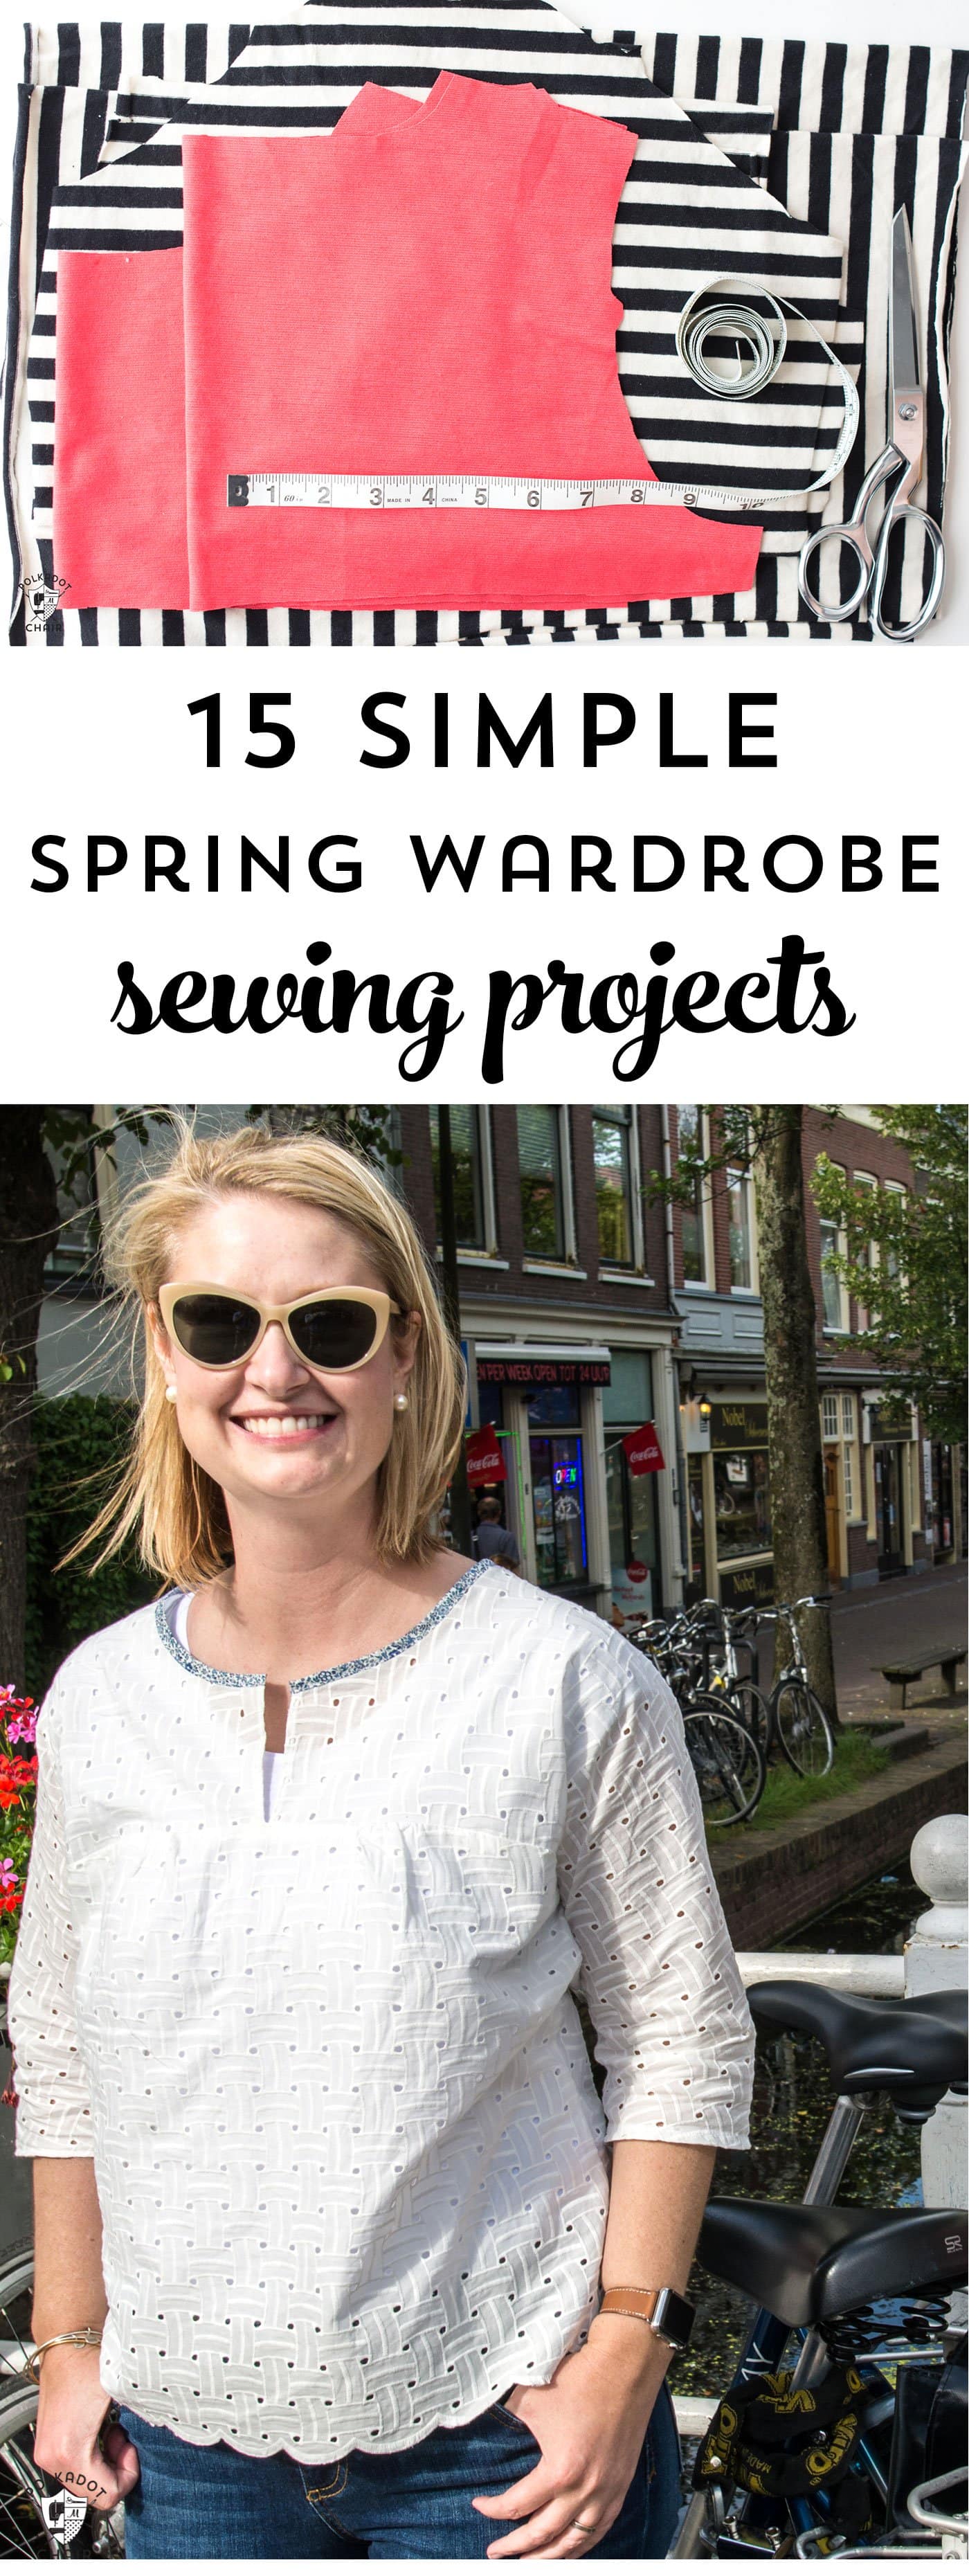 15 Simple Spring Wardrobe Sewing projects; from fun spring tops to simple summer dresses, there are so many cute things to sew on this list!